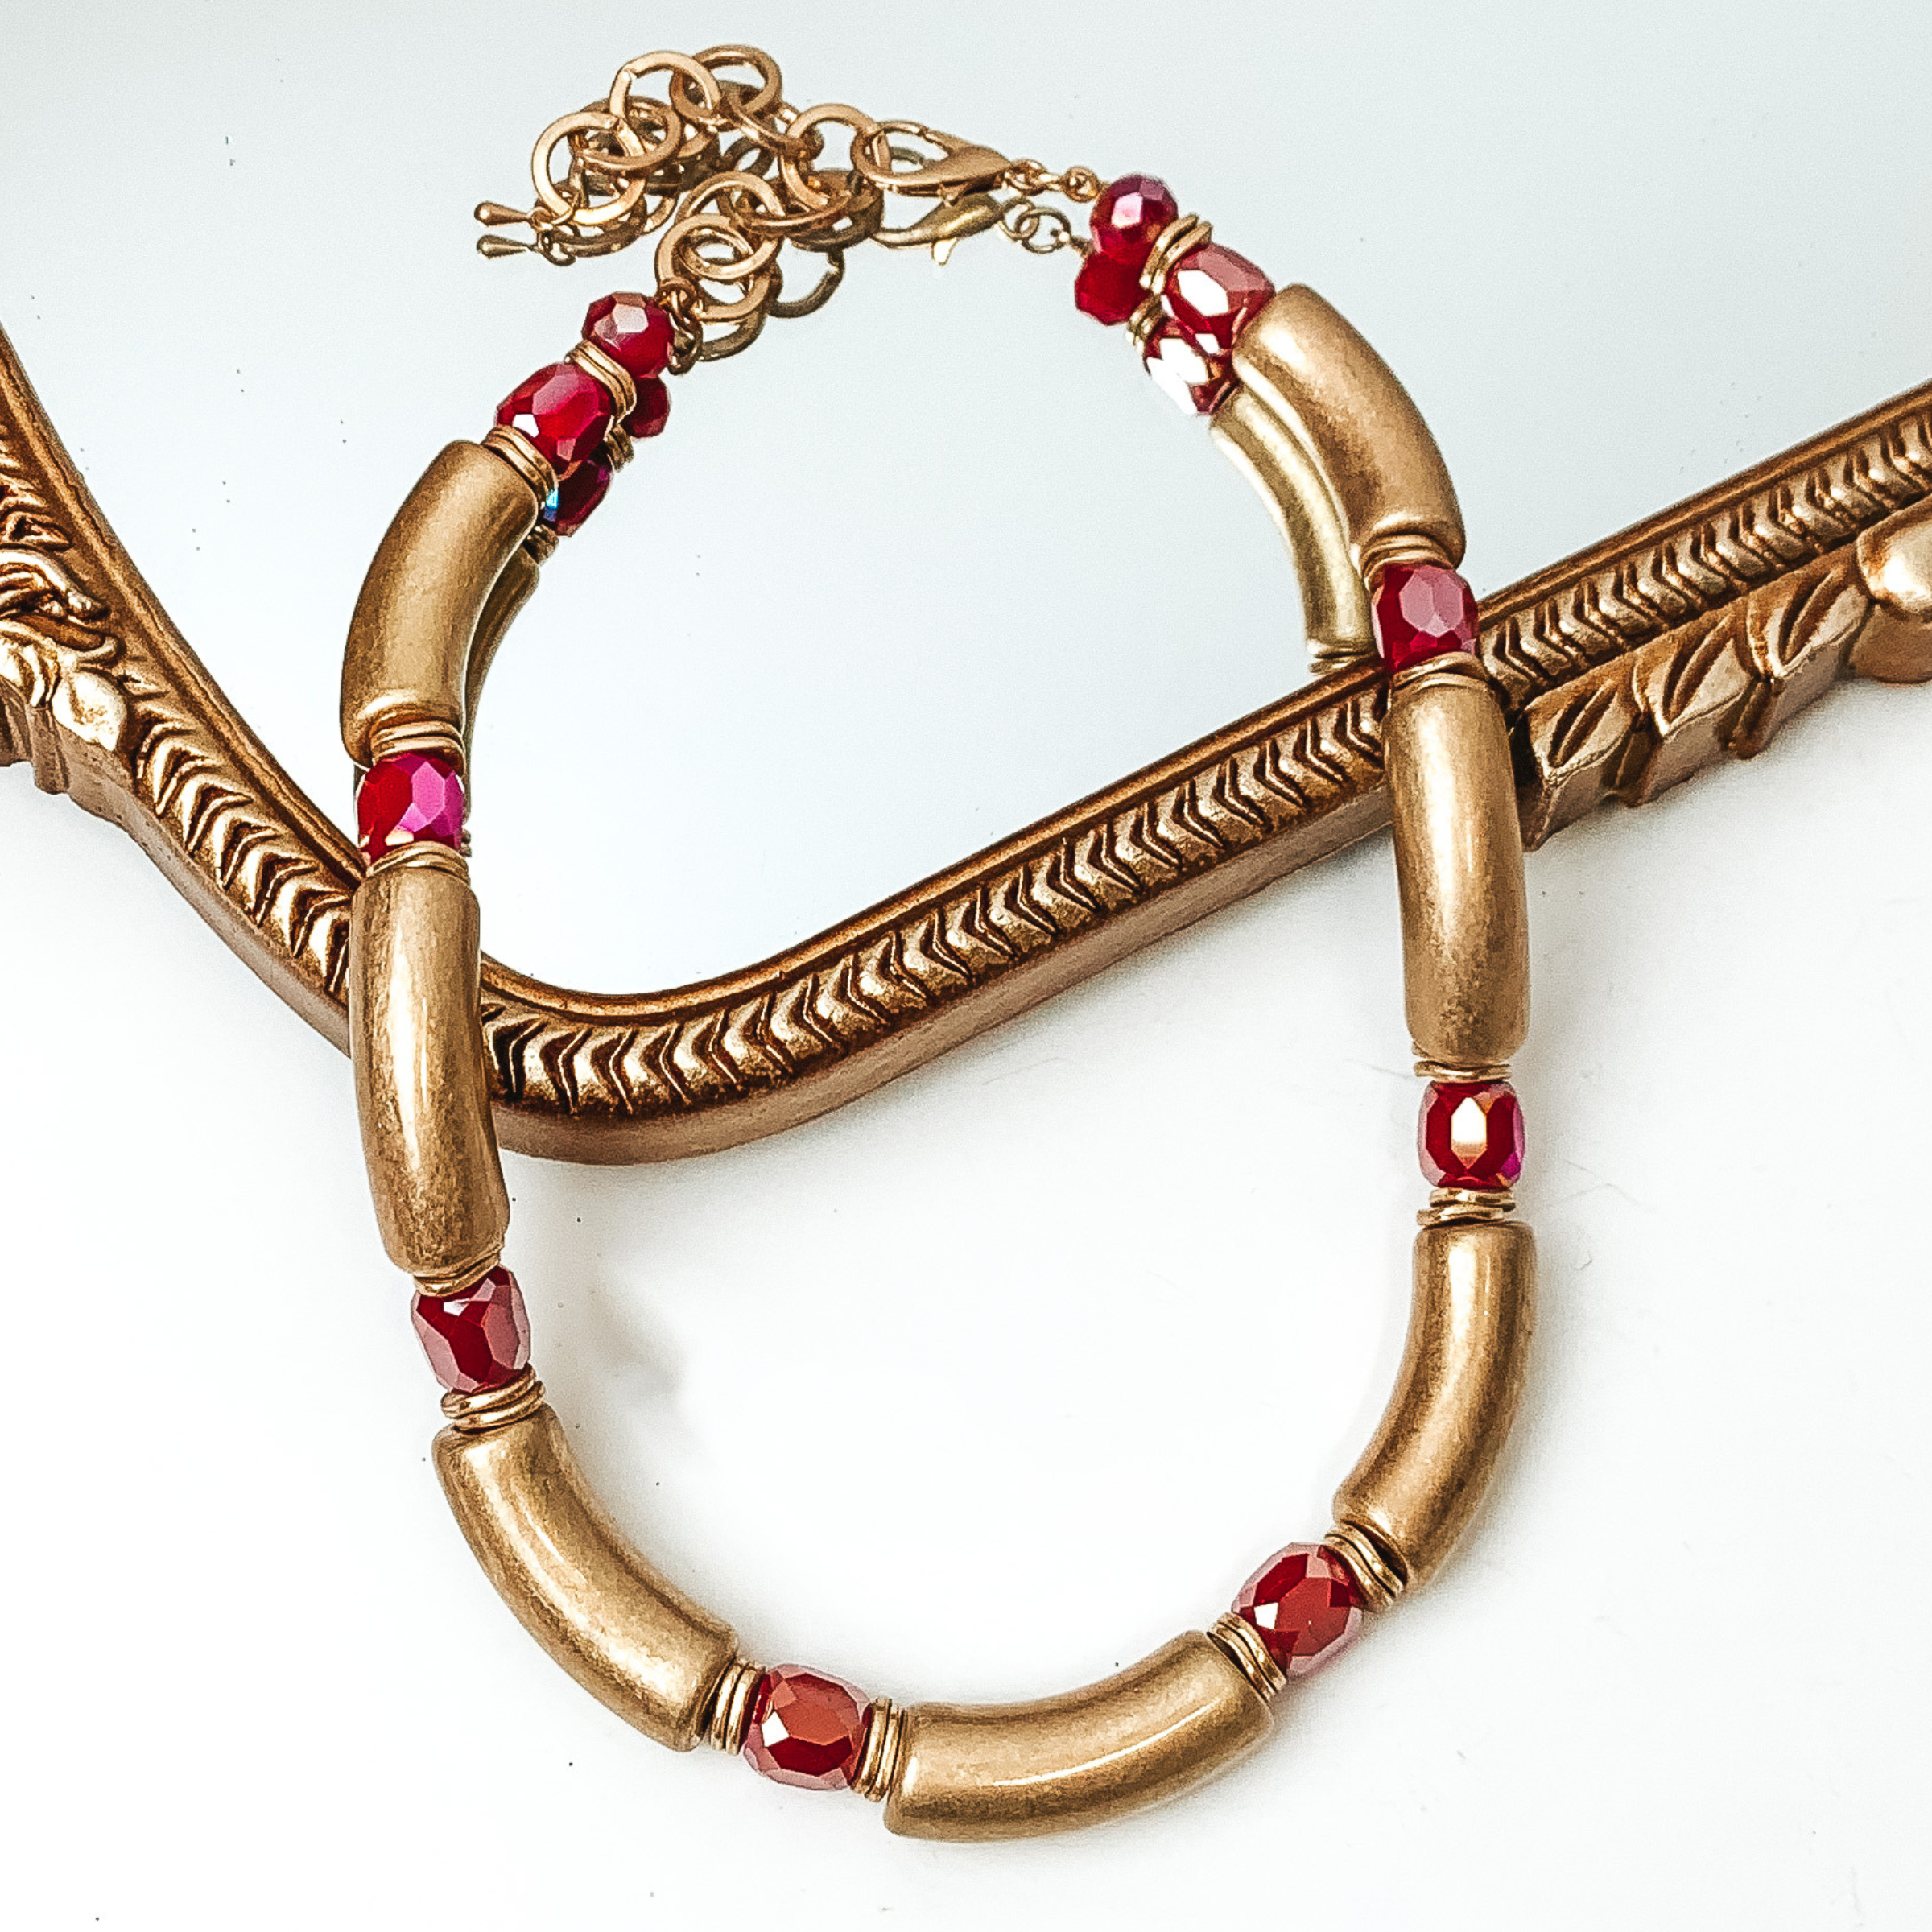 Gold tube necklae with red crystal bead spacers. This necklace is pictured partially laying on a gold mirror on a white background. 